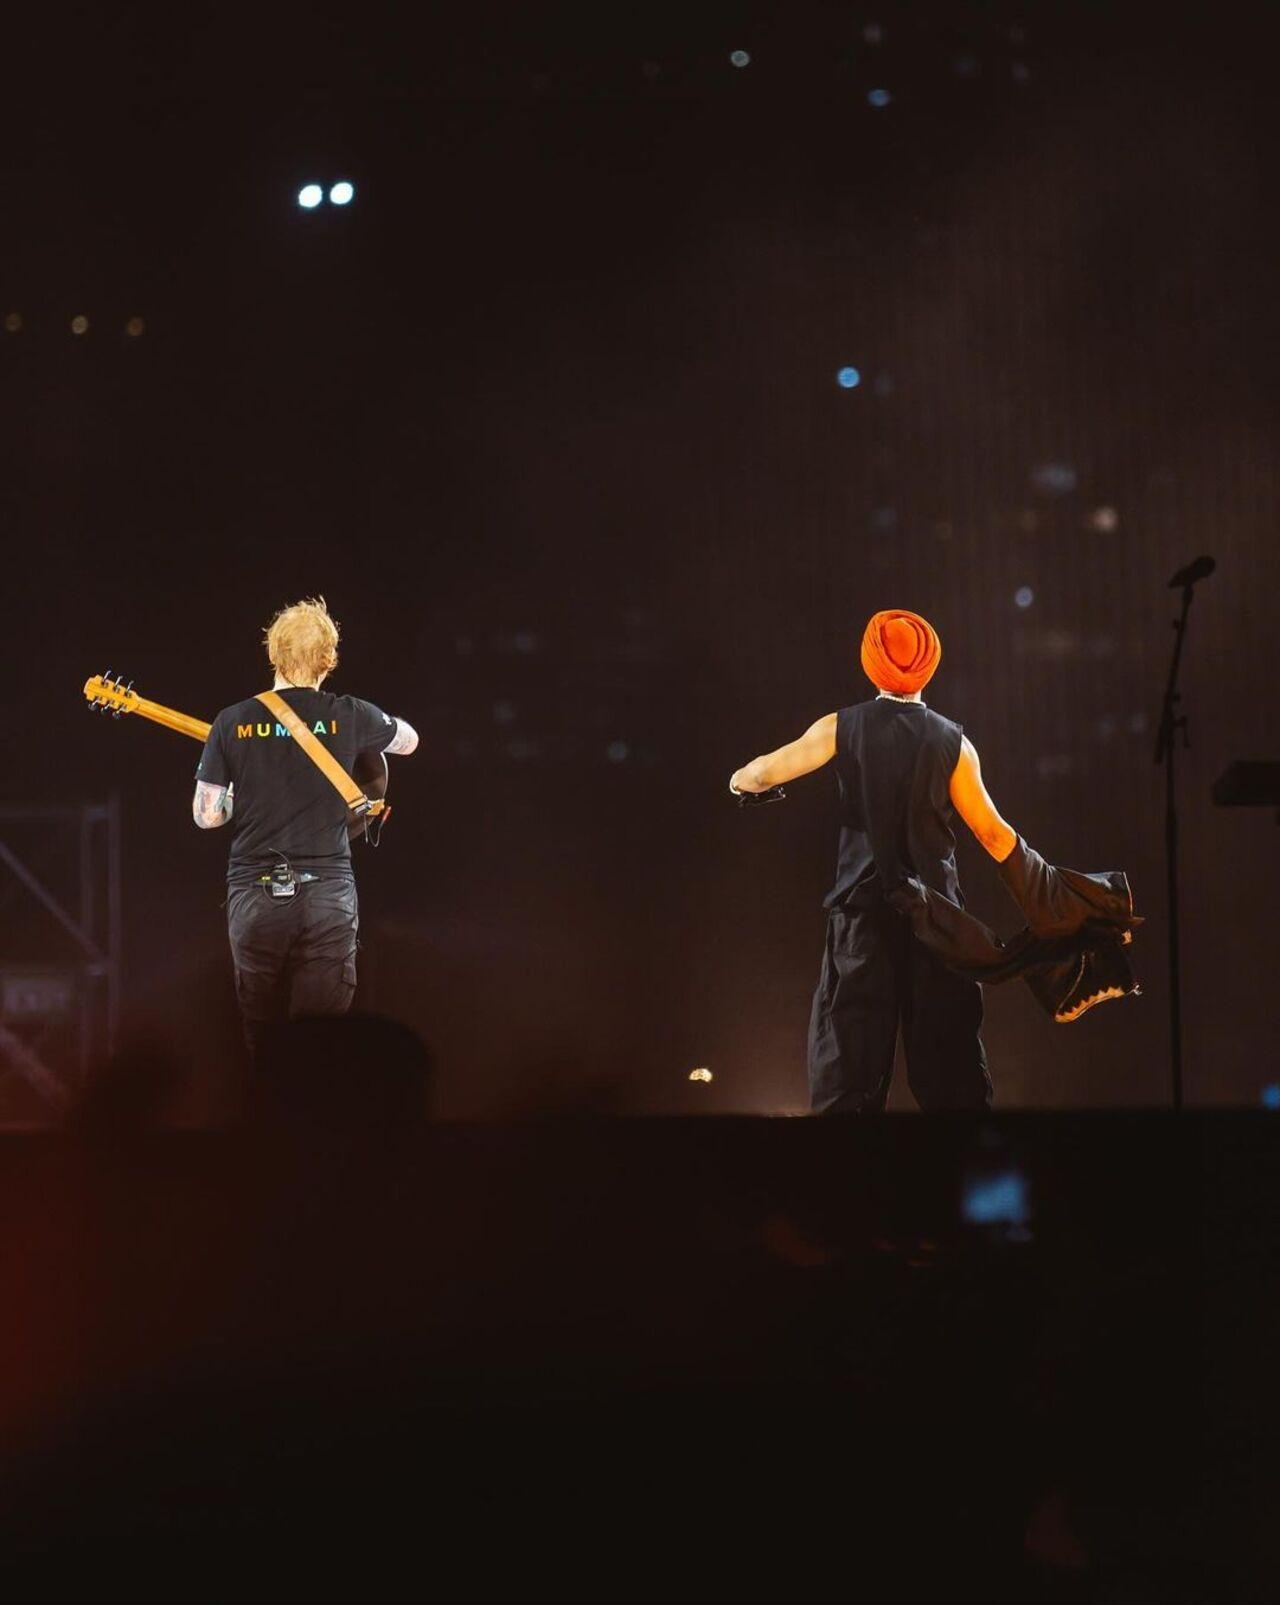 Diljit not only sang his popular track 'Lover' but also got Ed Sheeran to sing in Punjabi and it was quite a moment